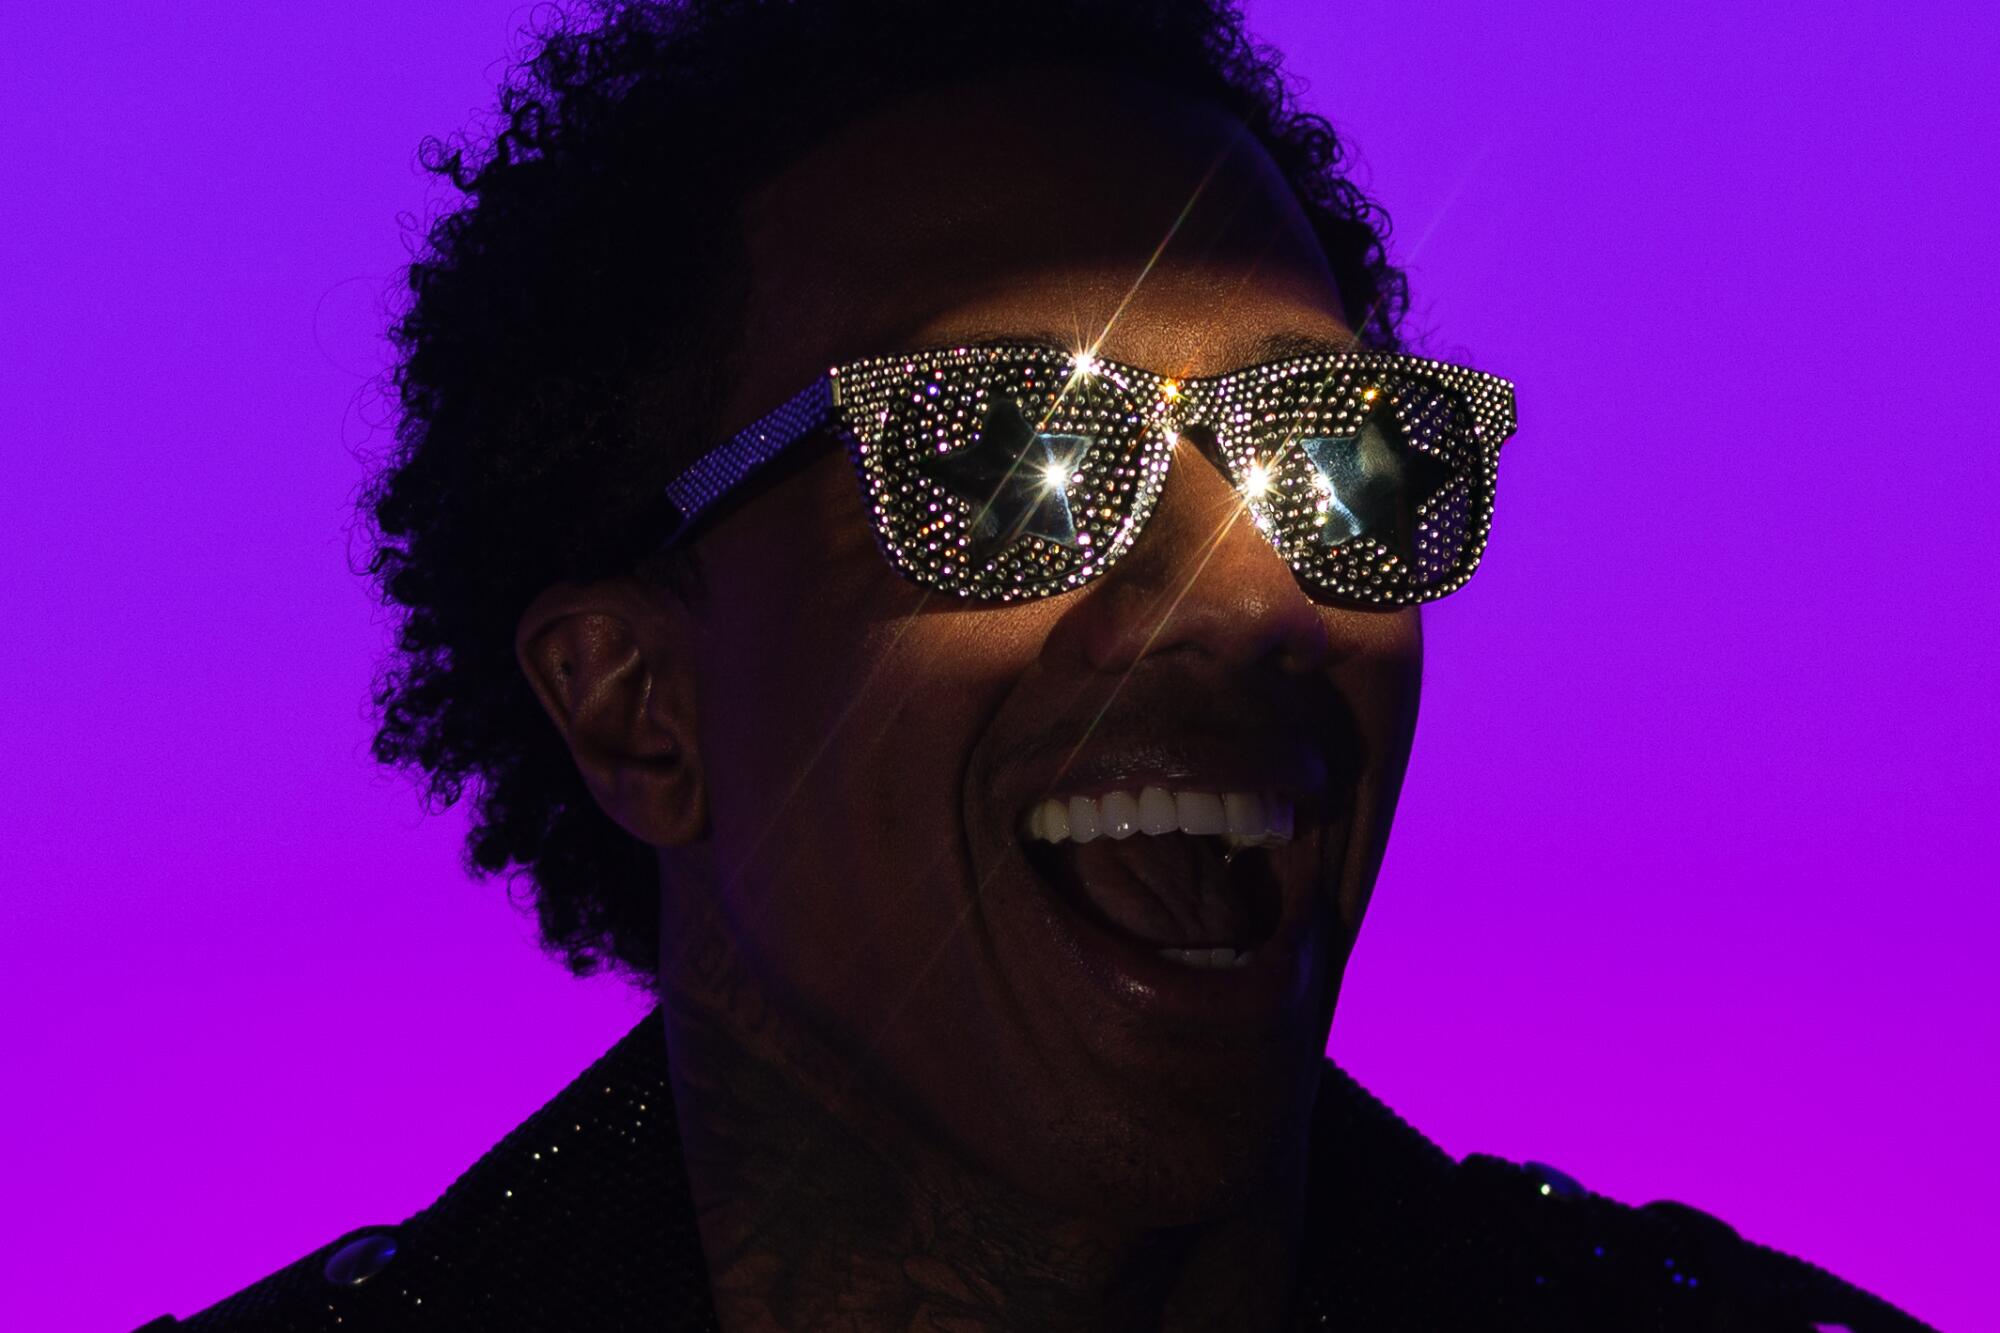 A man wearing starry sunglasses smiles